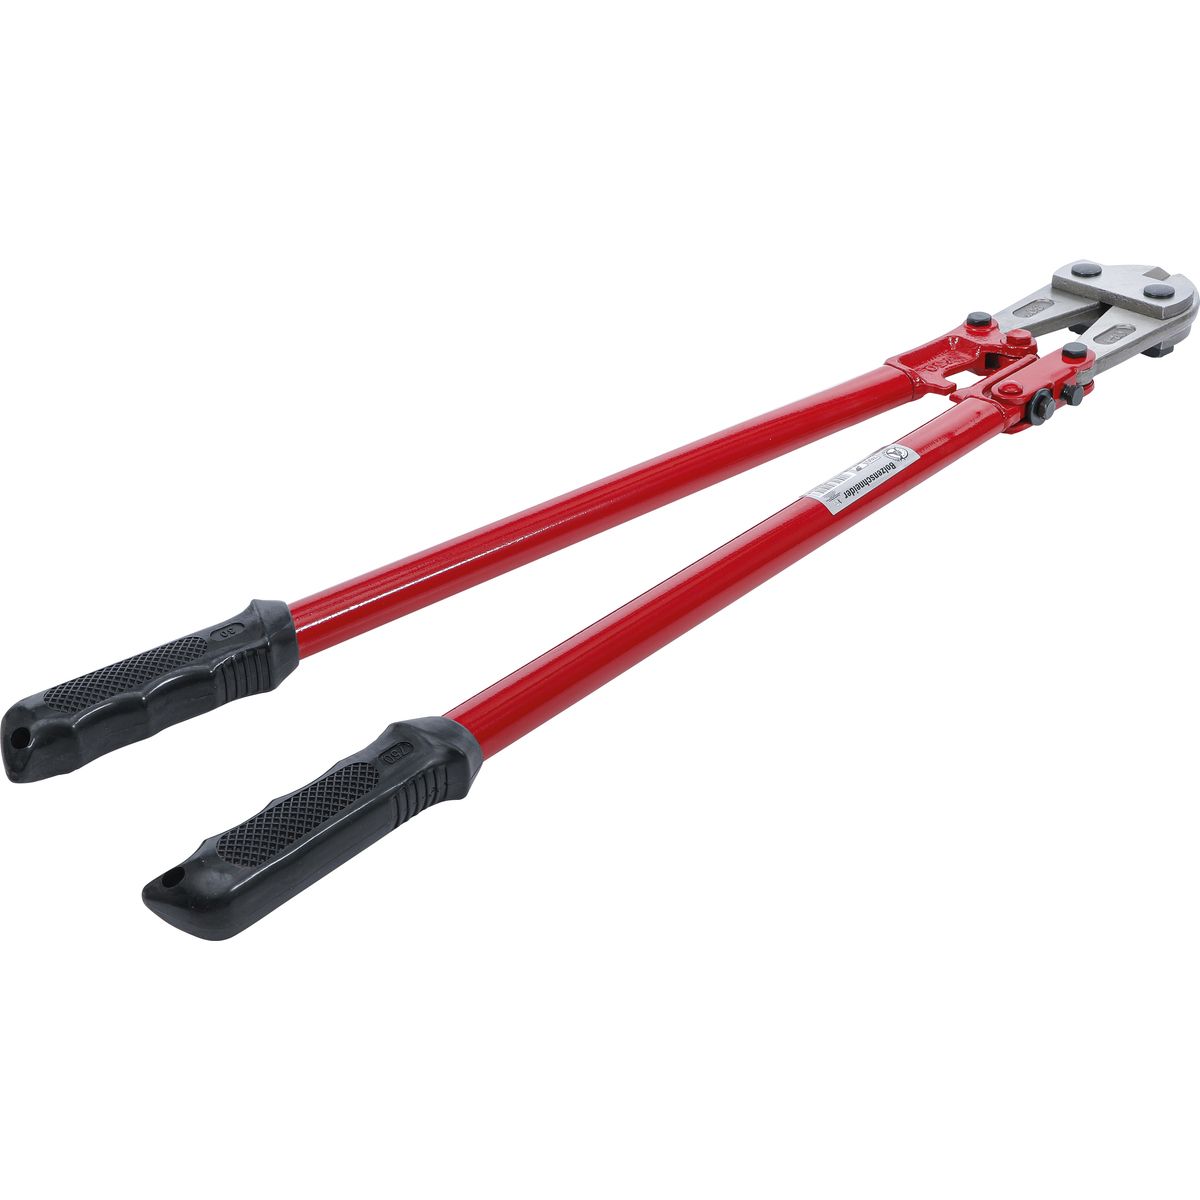 Bolt Cutter with Hardened Jaws | 760 mm